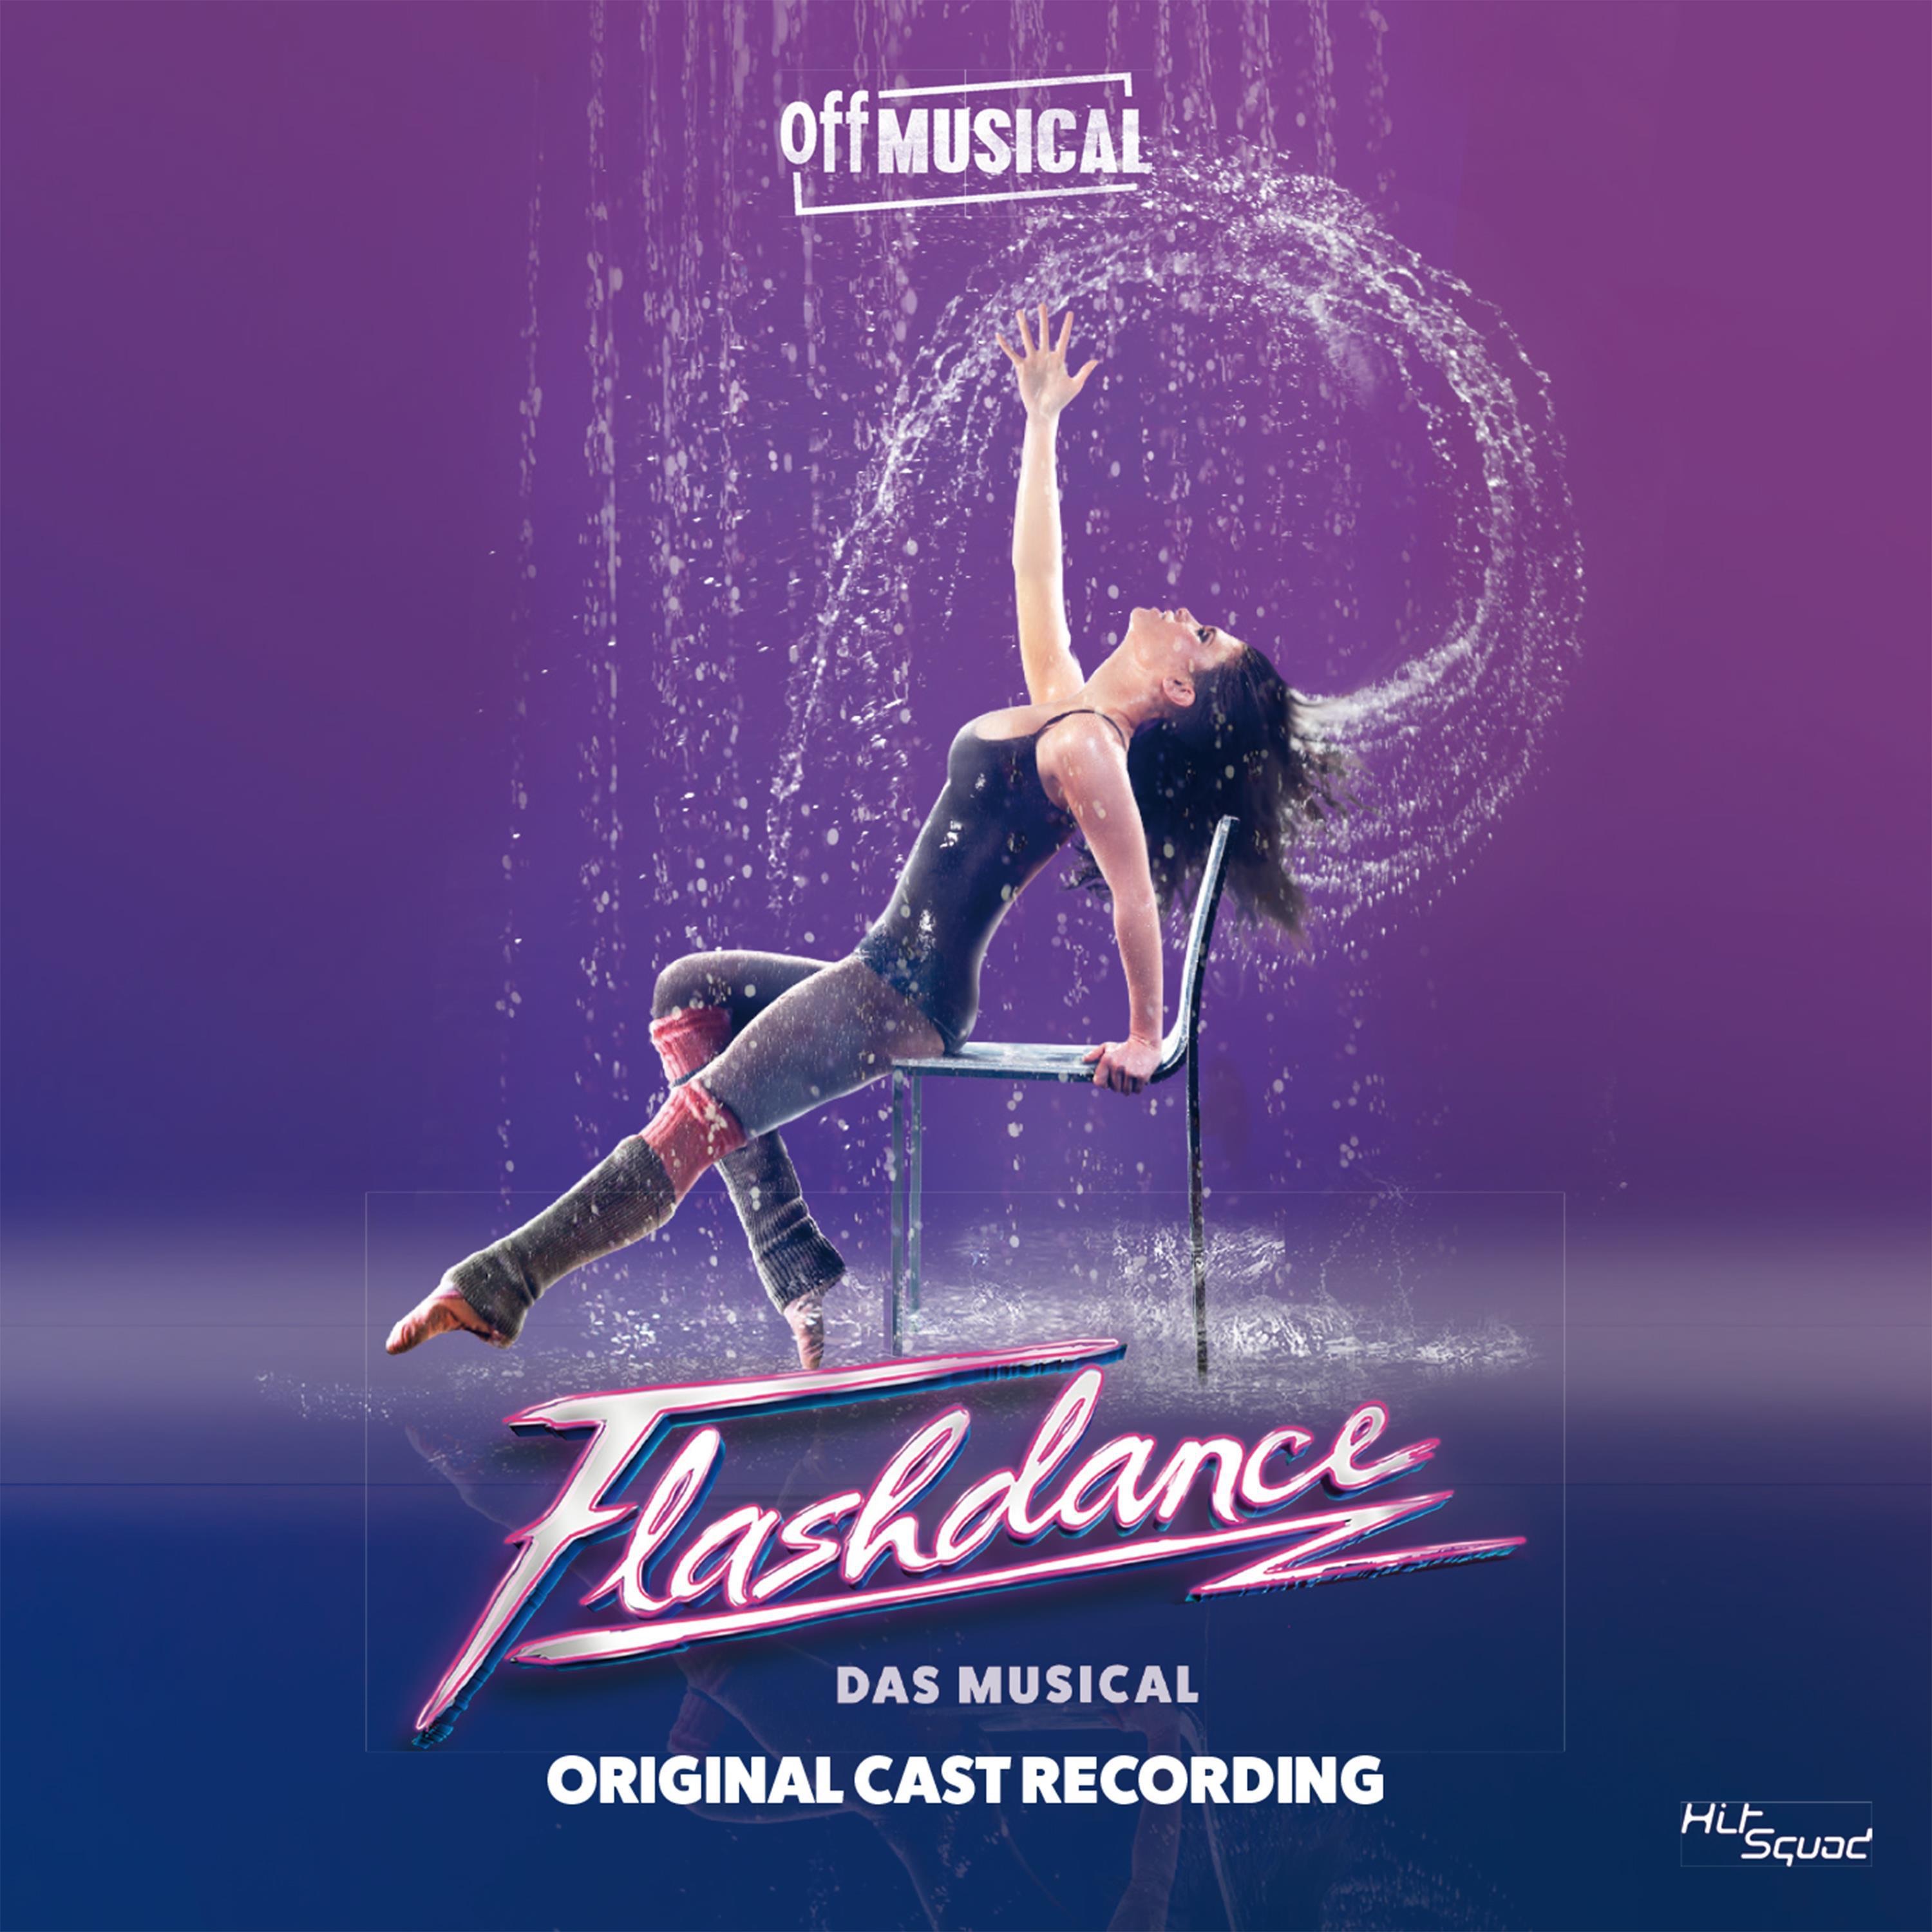 Flashdance what a feeling. Flashdance набор музыки. Flashdance poster. Flashdance - Original Soundtrack from the Motion picture.